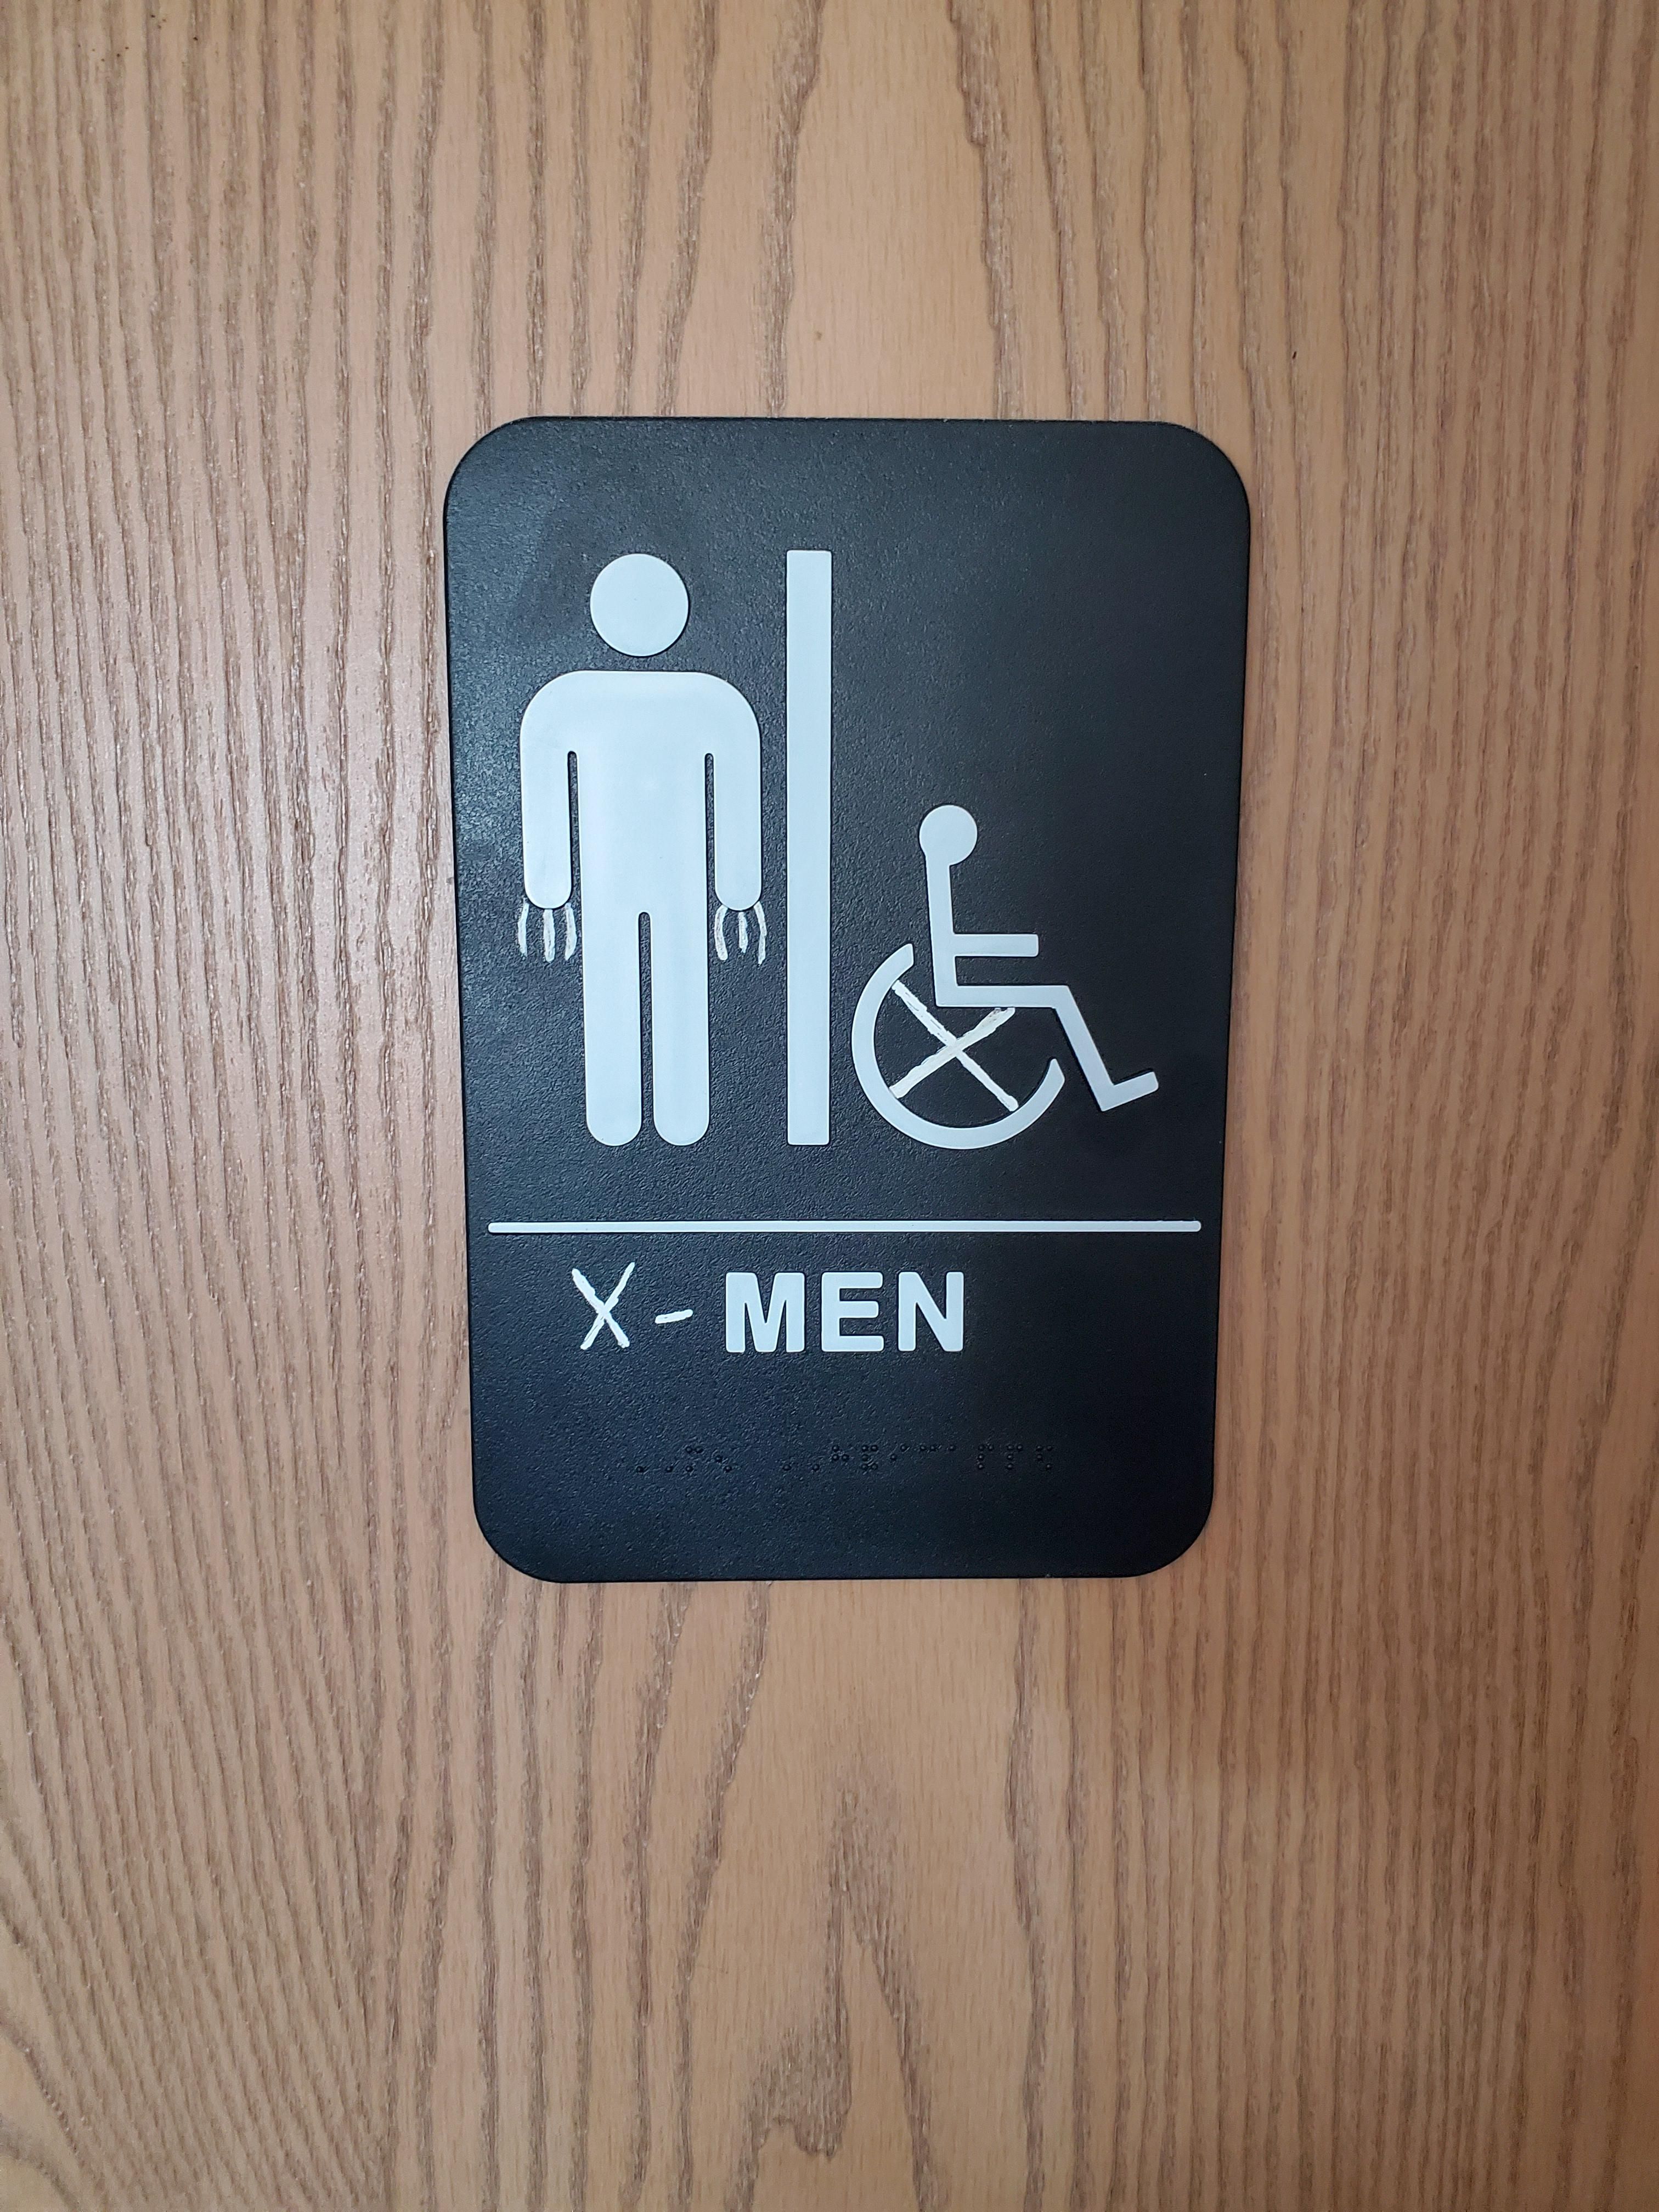 Guess I'm not qualified to use this bathroom.